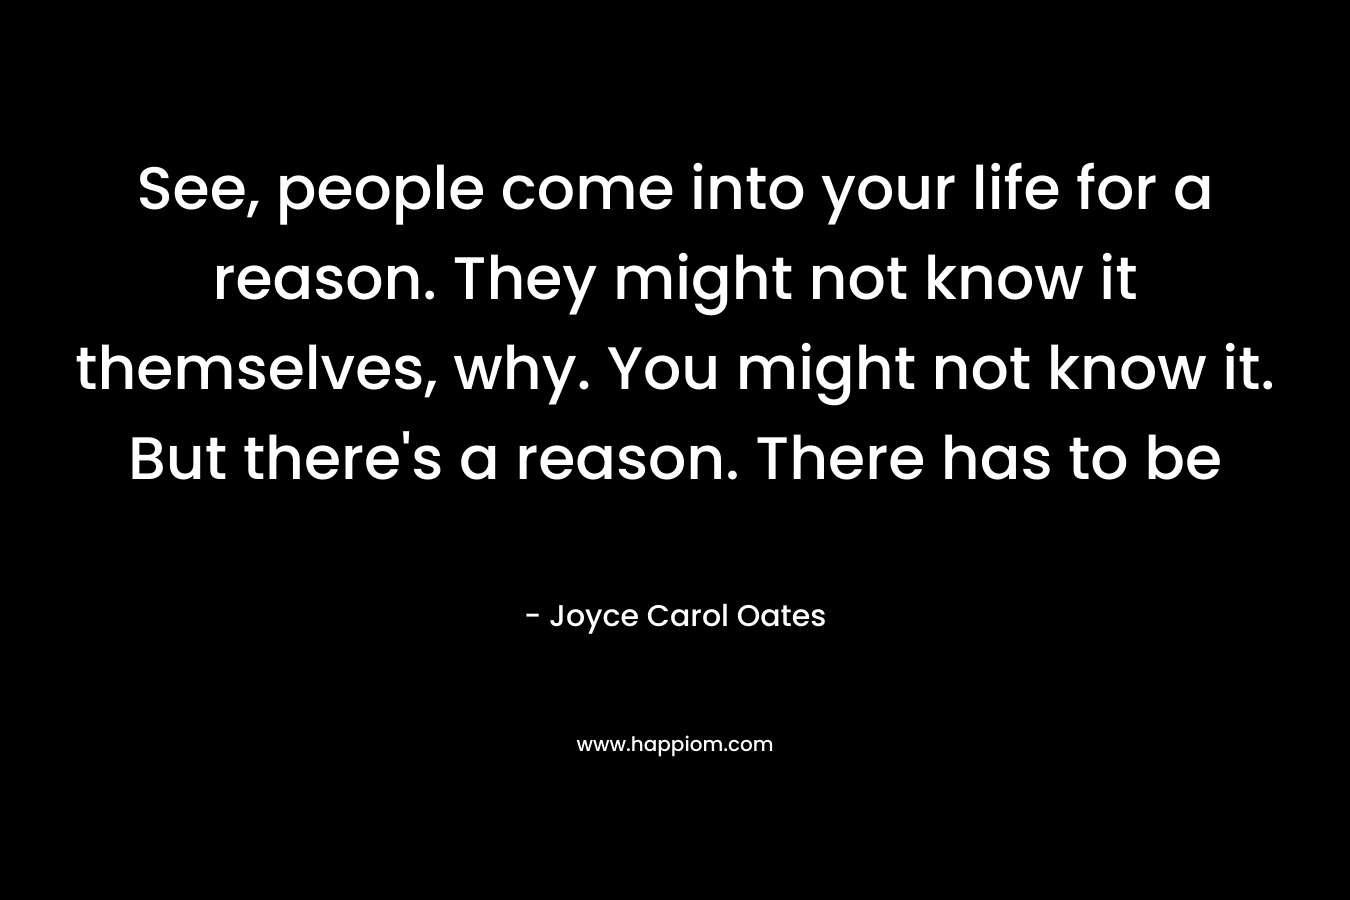 See, people come into your life for a reason. They might not know it themselves, why. You might not know it. But there’s a reason. There has to be – Joyce Carol Oates